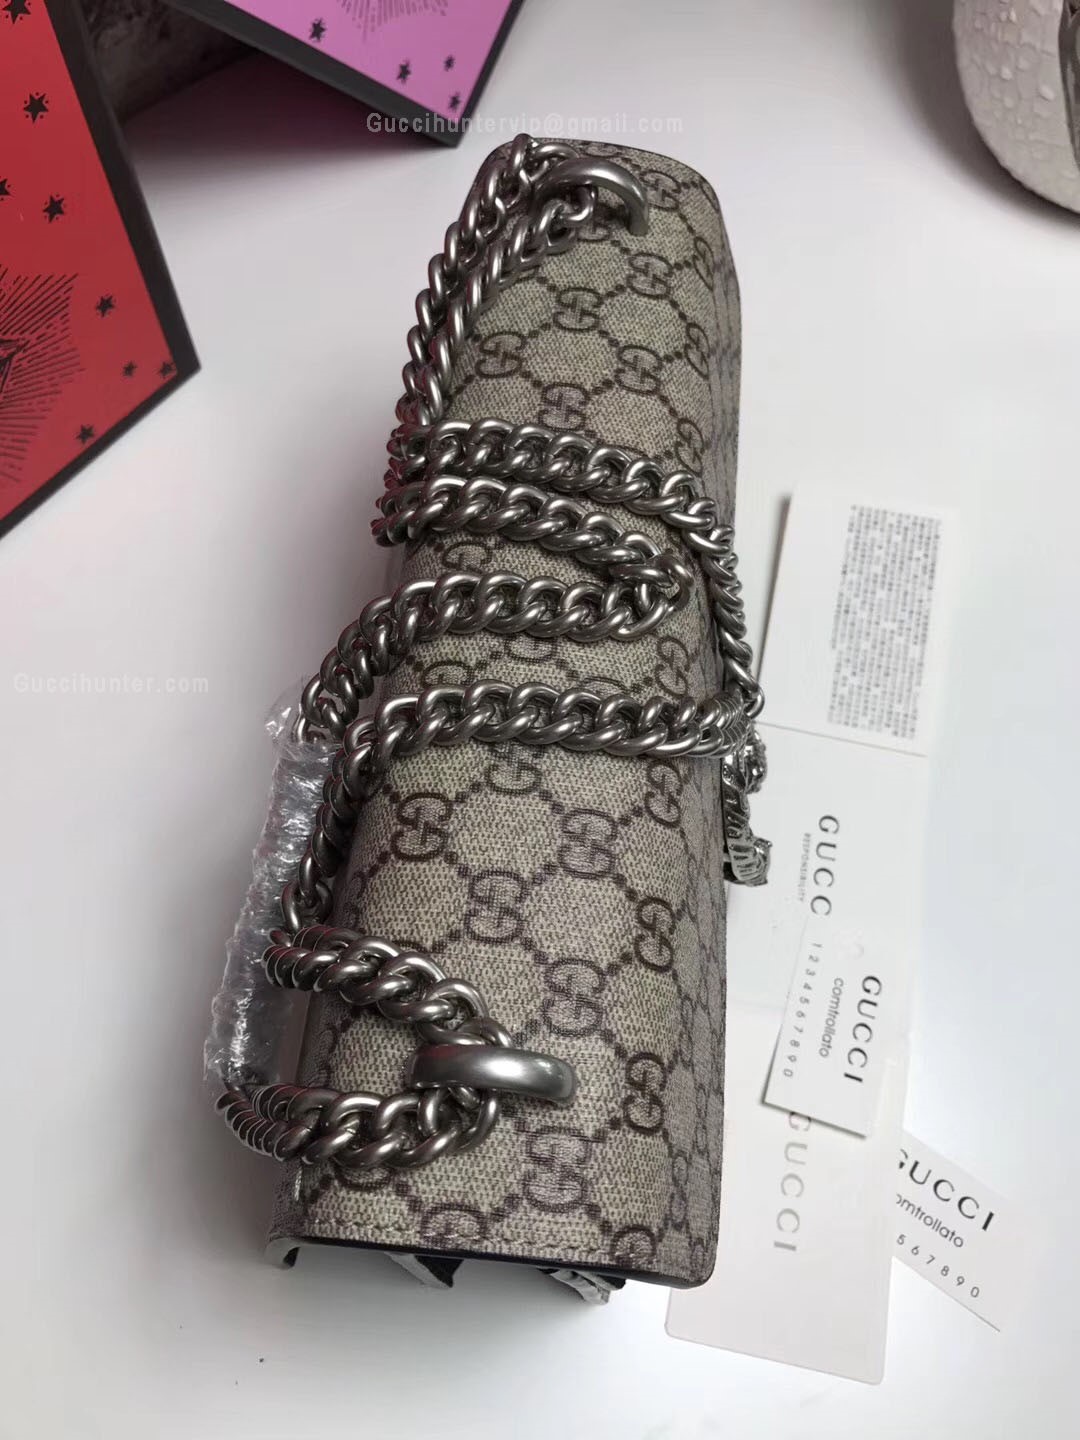 Gucci Dionysus replica Small GG Blooms Shoulder Bag Chain